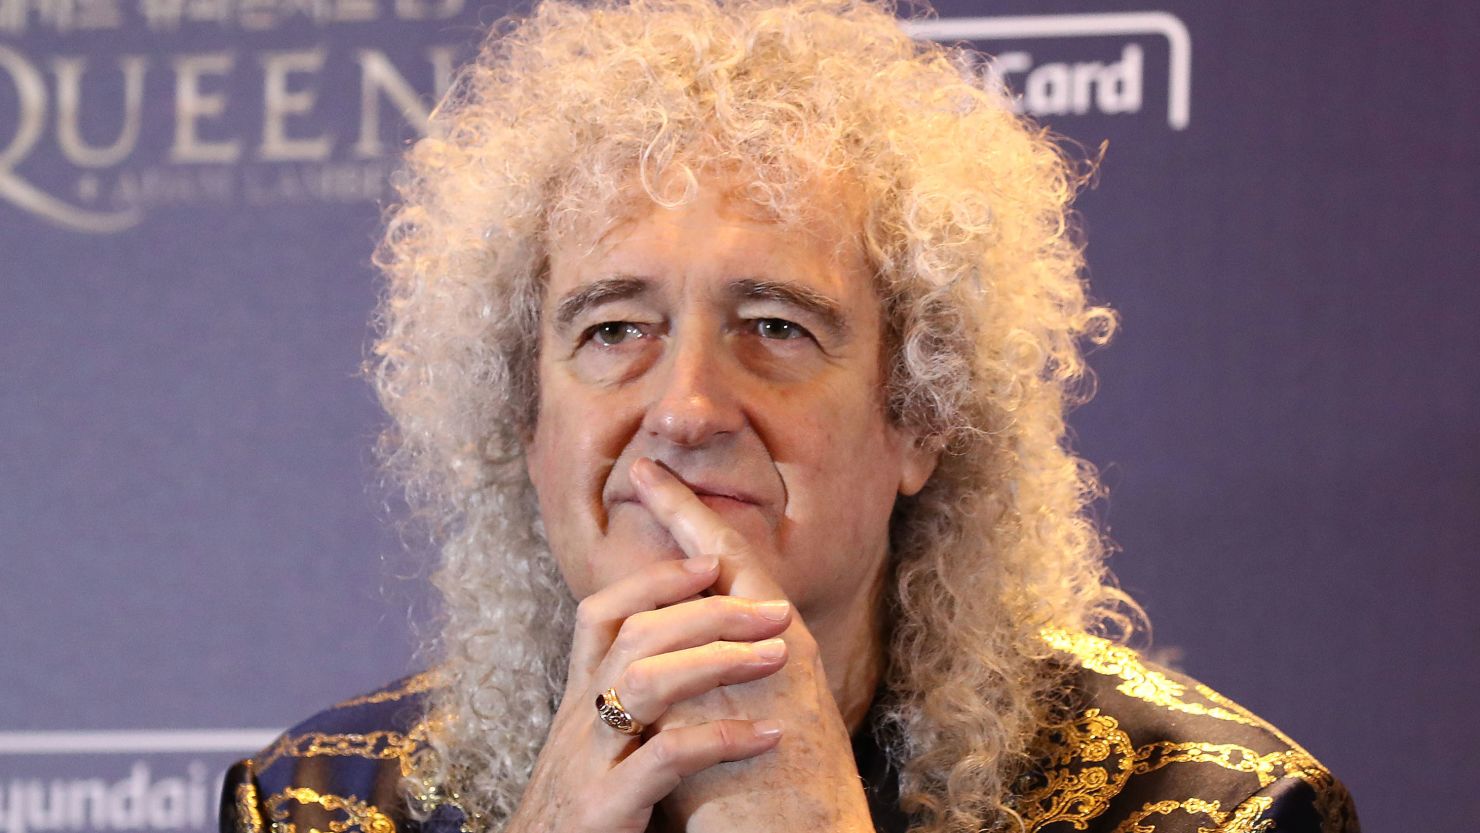 Brian May did not reveal how he had injured himself in the incident.